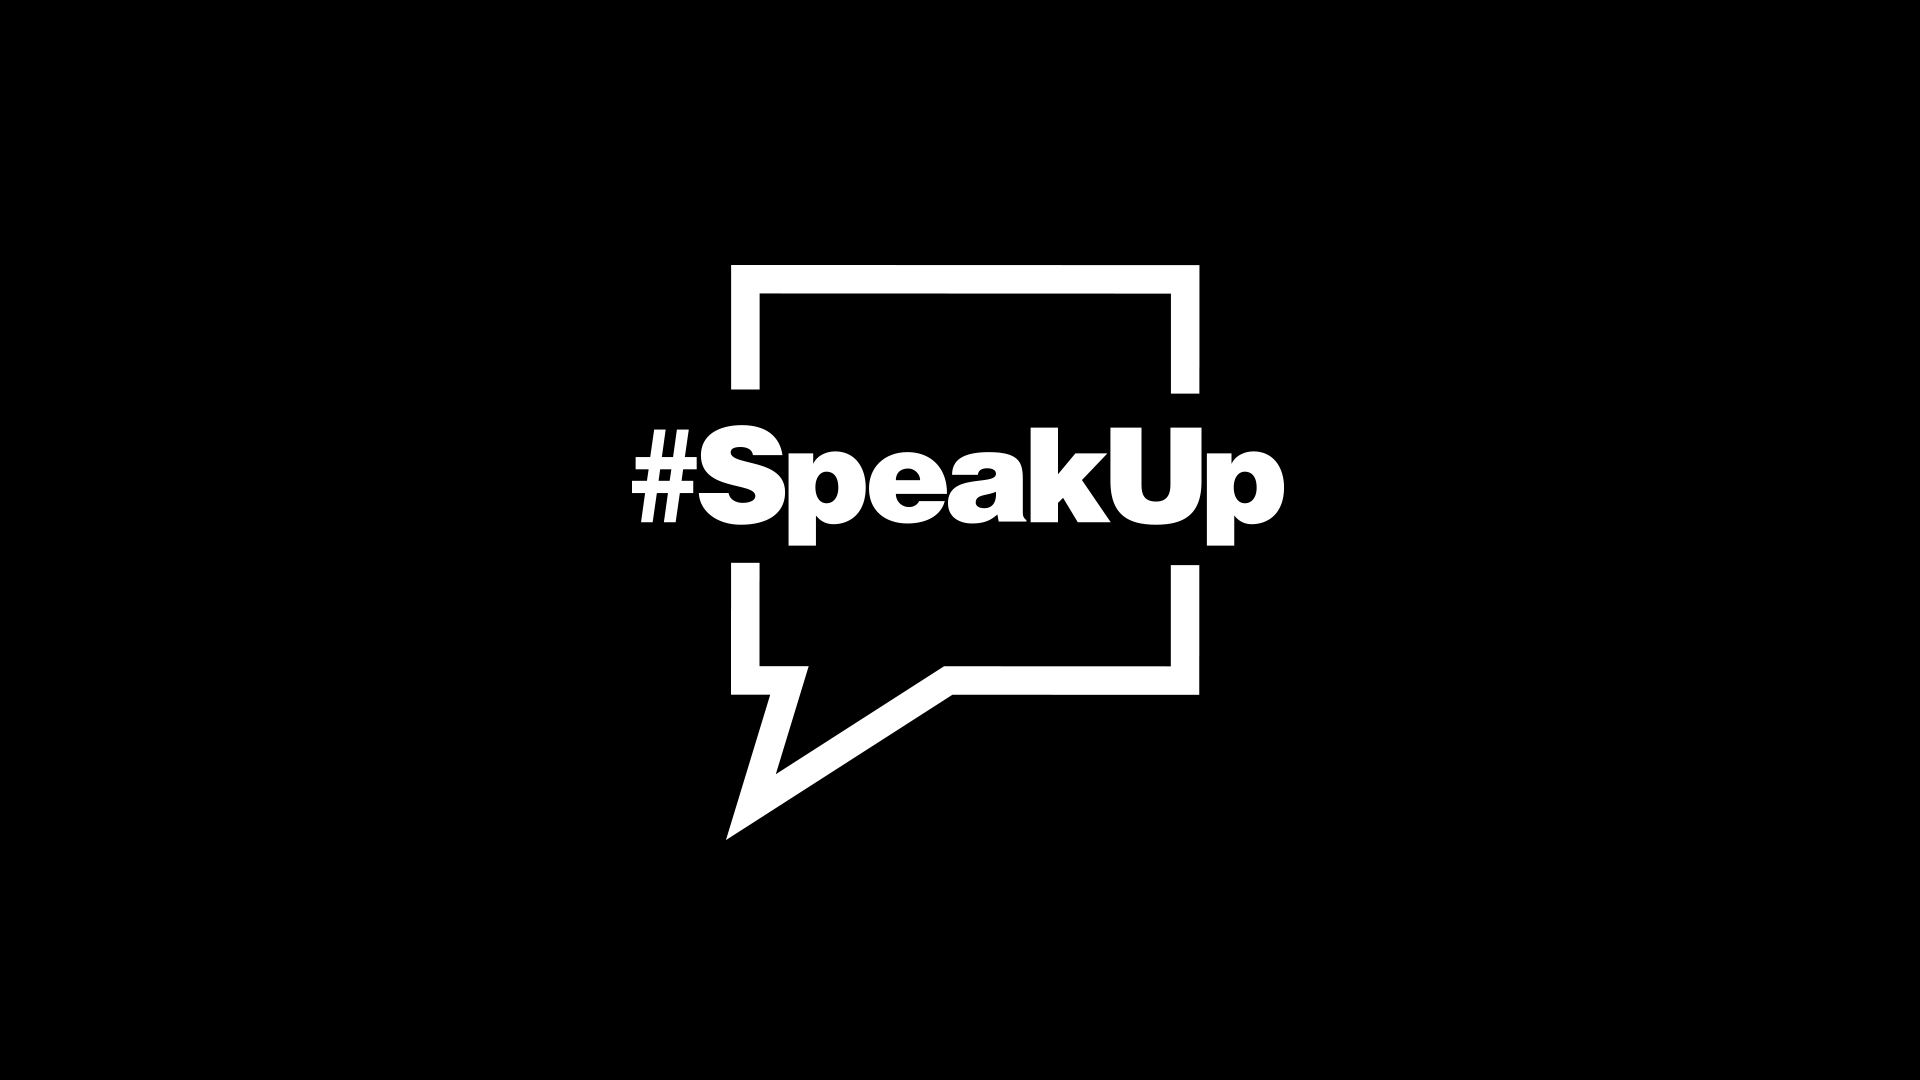 SONiC artists #SpeakUp about Black Lives Matter 102.9